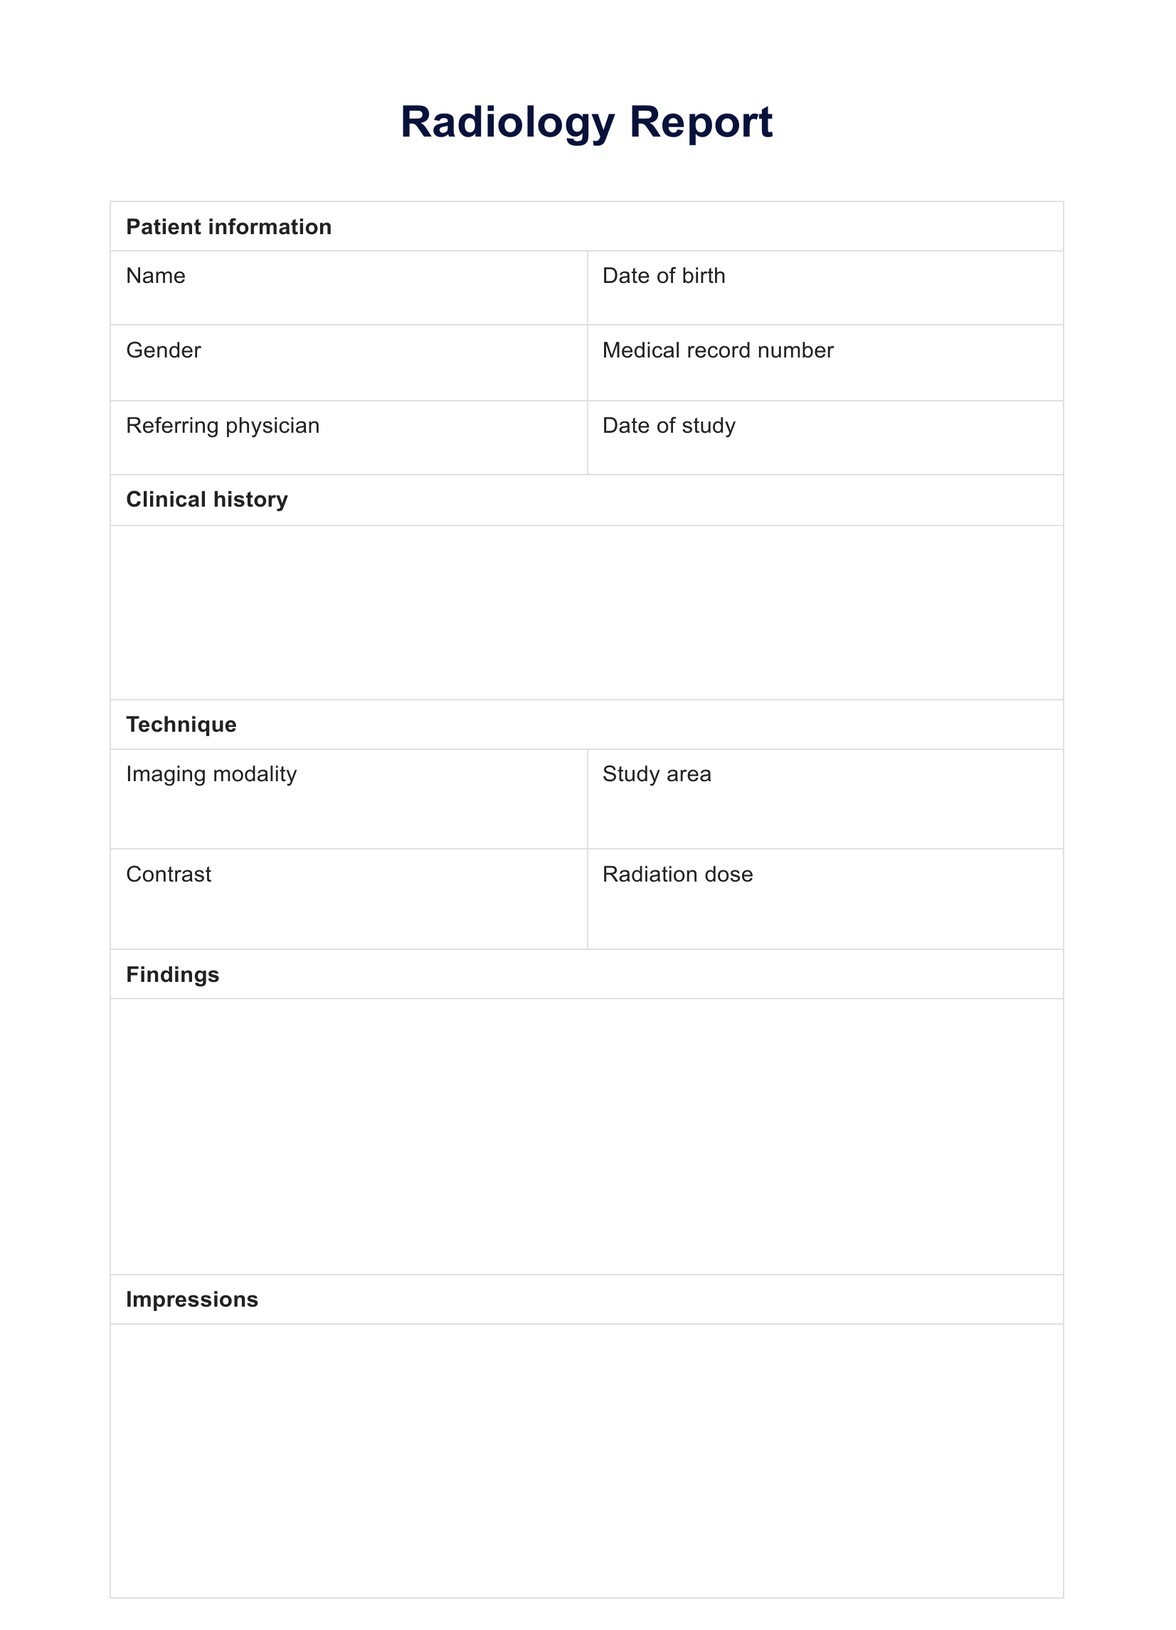 Radiology Report Template PDF Example